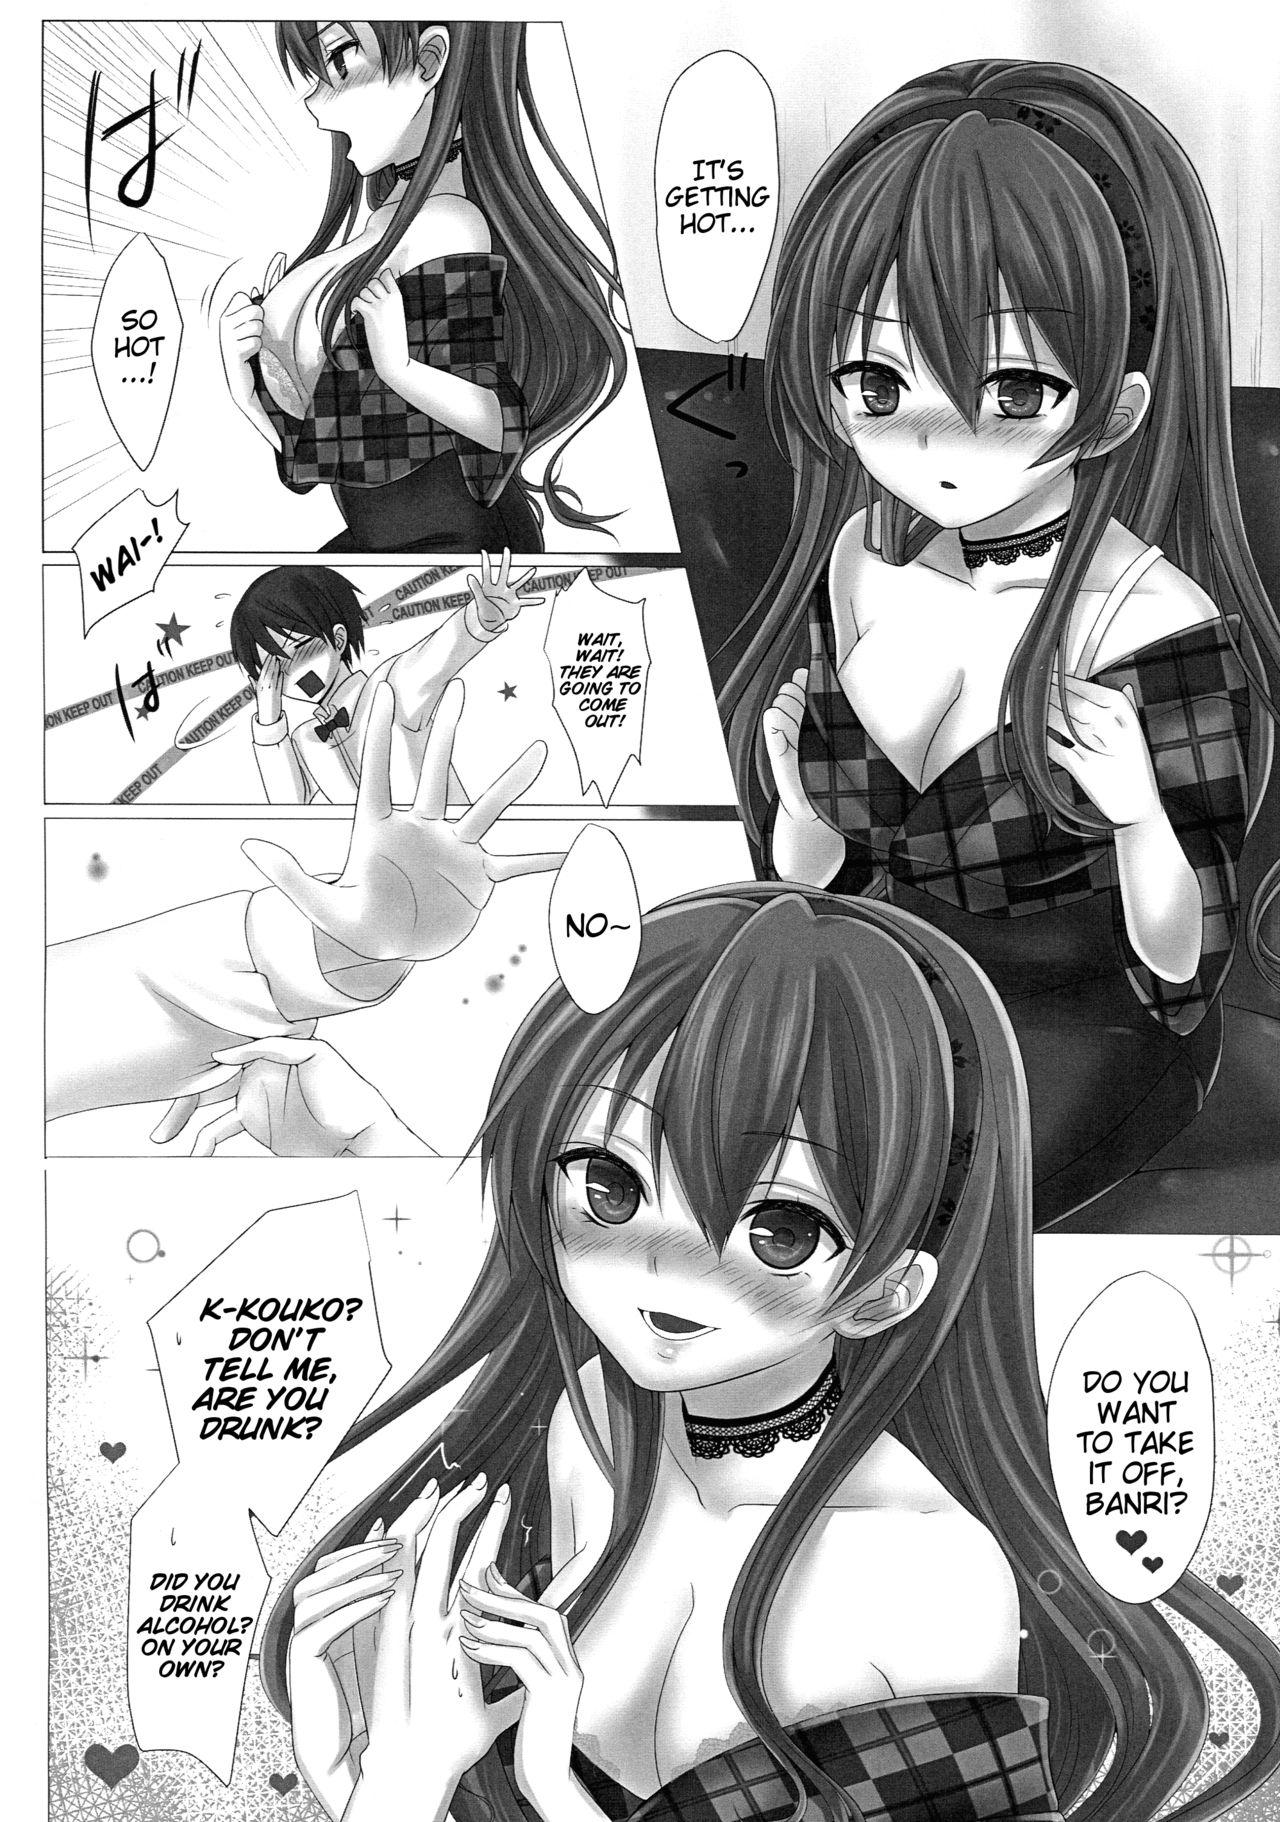 Naturaltits KISS ME TOUCH ME - Golden time Babe - Page 5